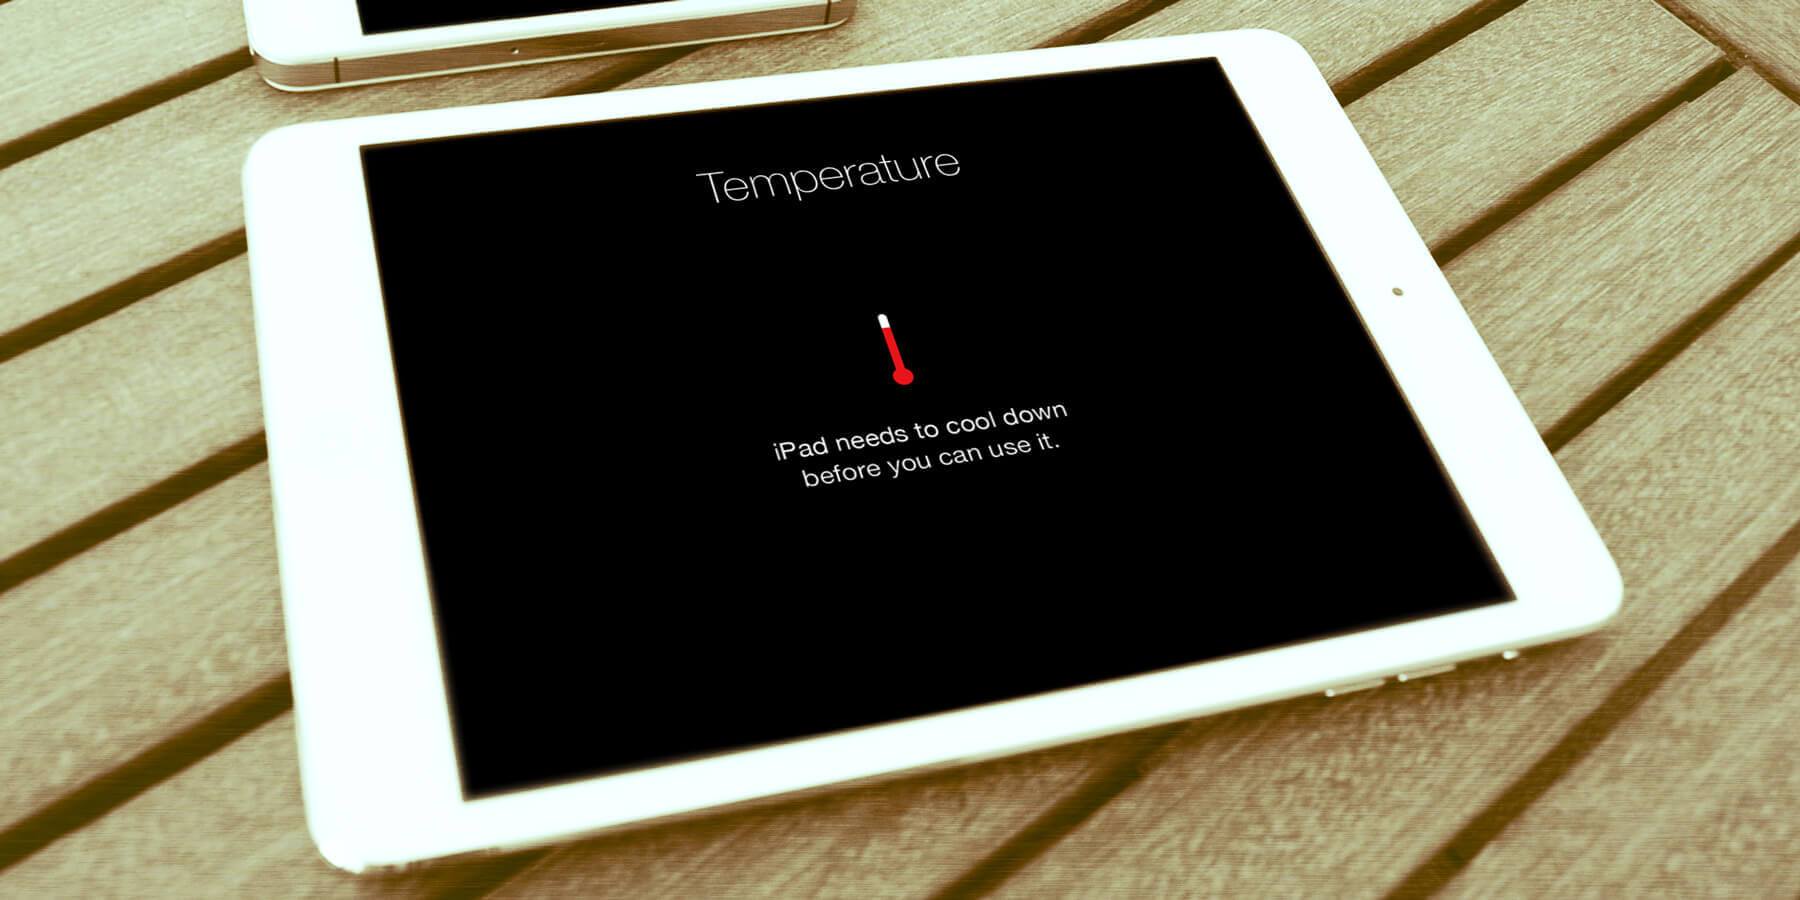 What to Do When You See the iPad Temperature Warning